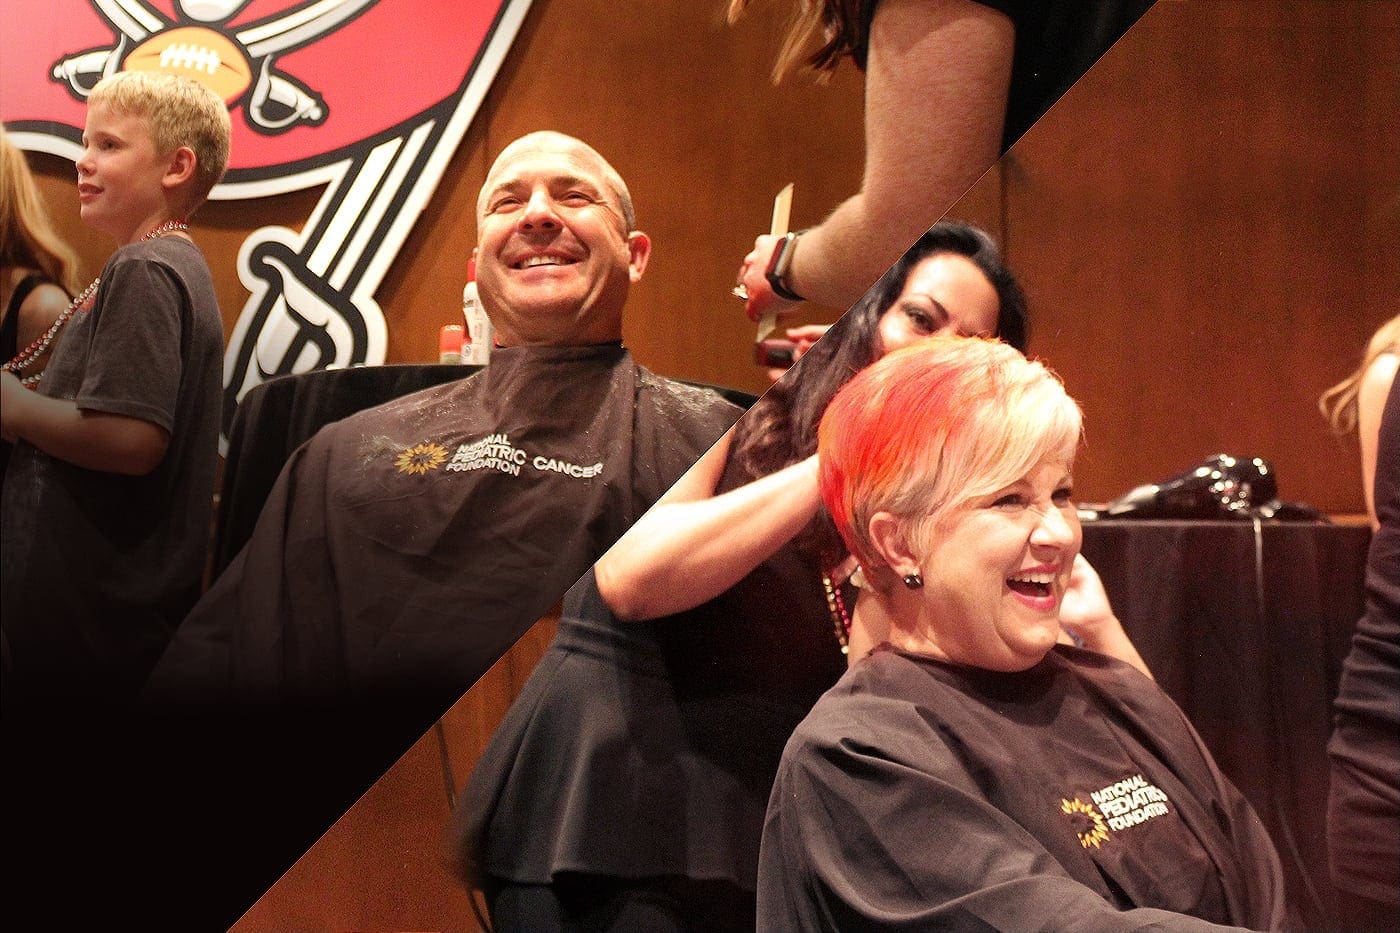 Picture cut in half showing one side a Male Tampa Bay Buccaneers Staff shaving his head and second half a Female Tampa Bay Buccaneers Staff coloring her hair